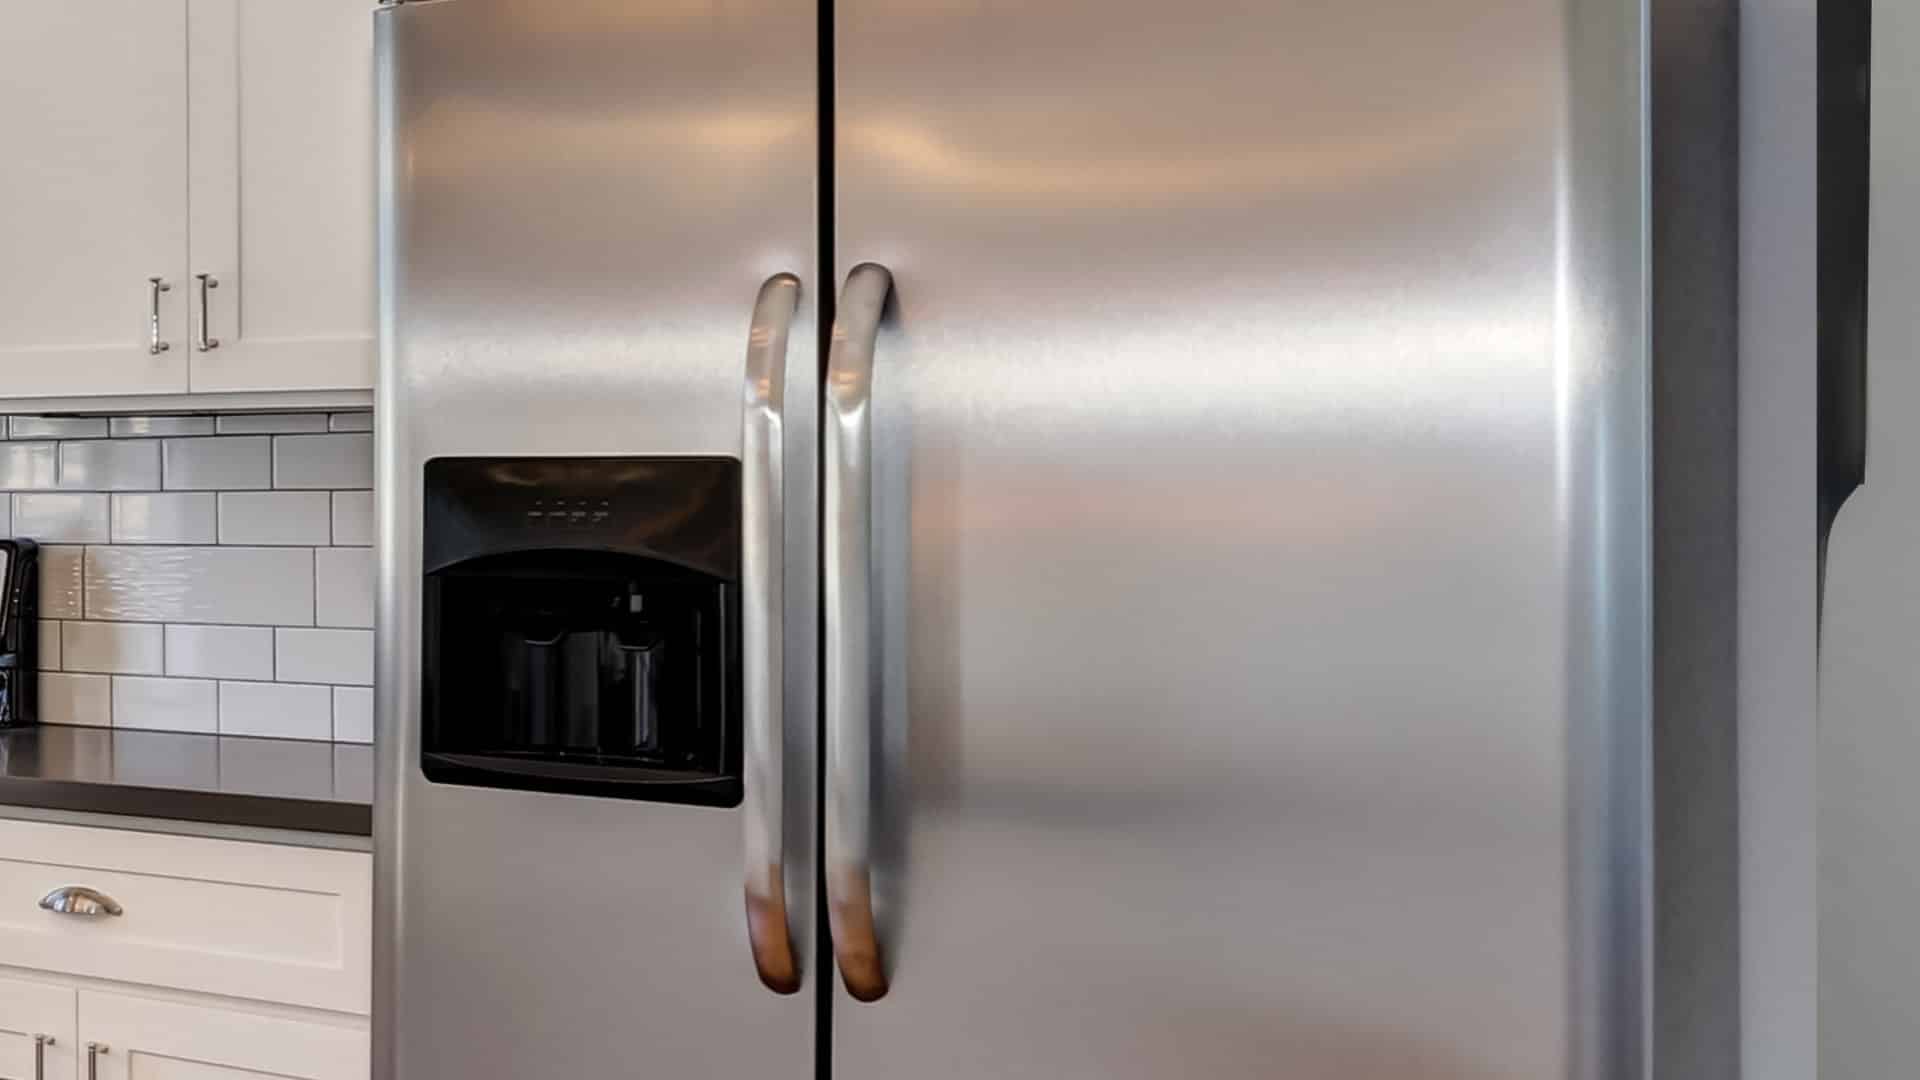 Featured image for “Why Your Refrigerator is Making Knocking Sounds”